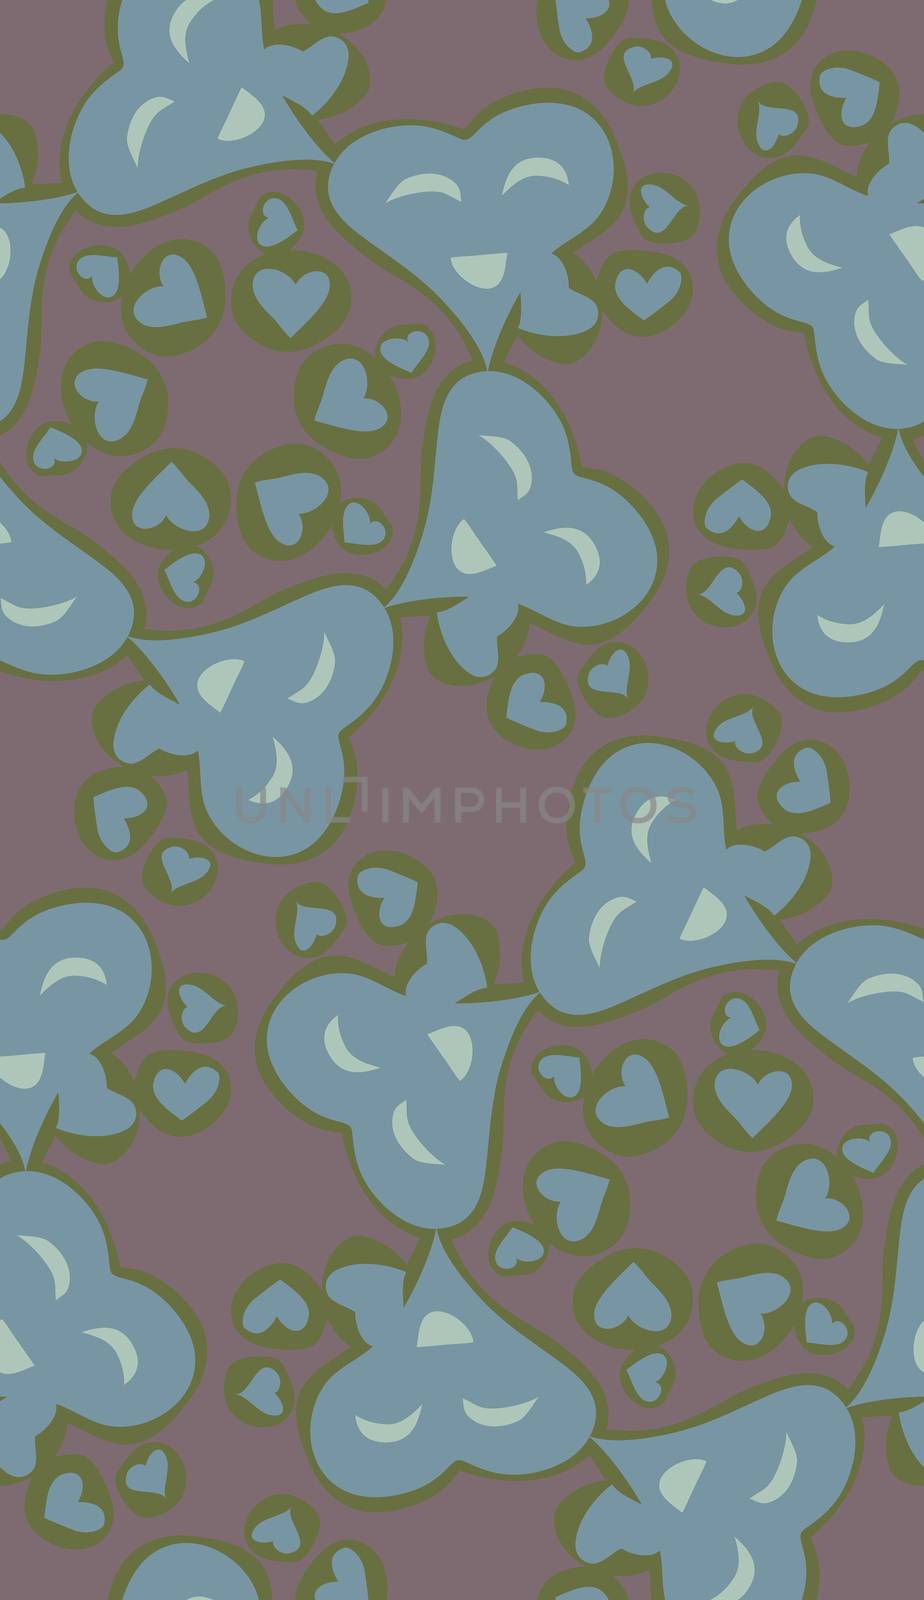 Repeating background pattern of connected smiling blue heart shapes